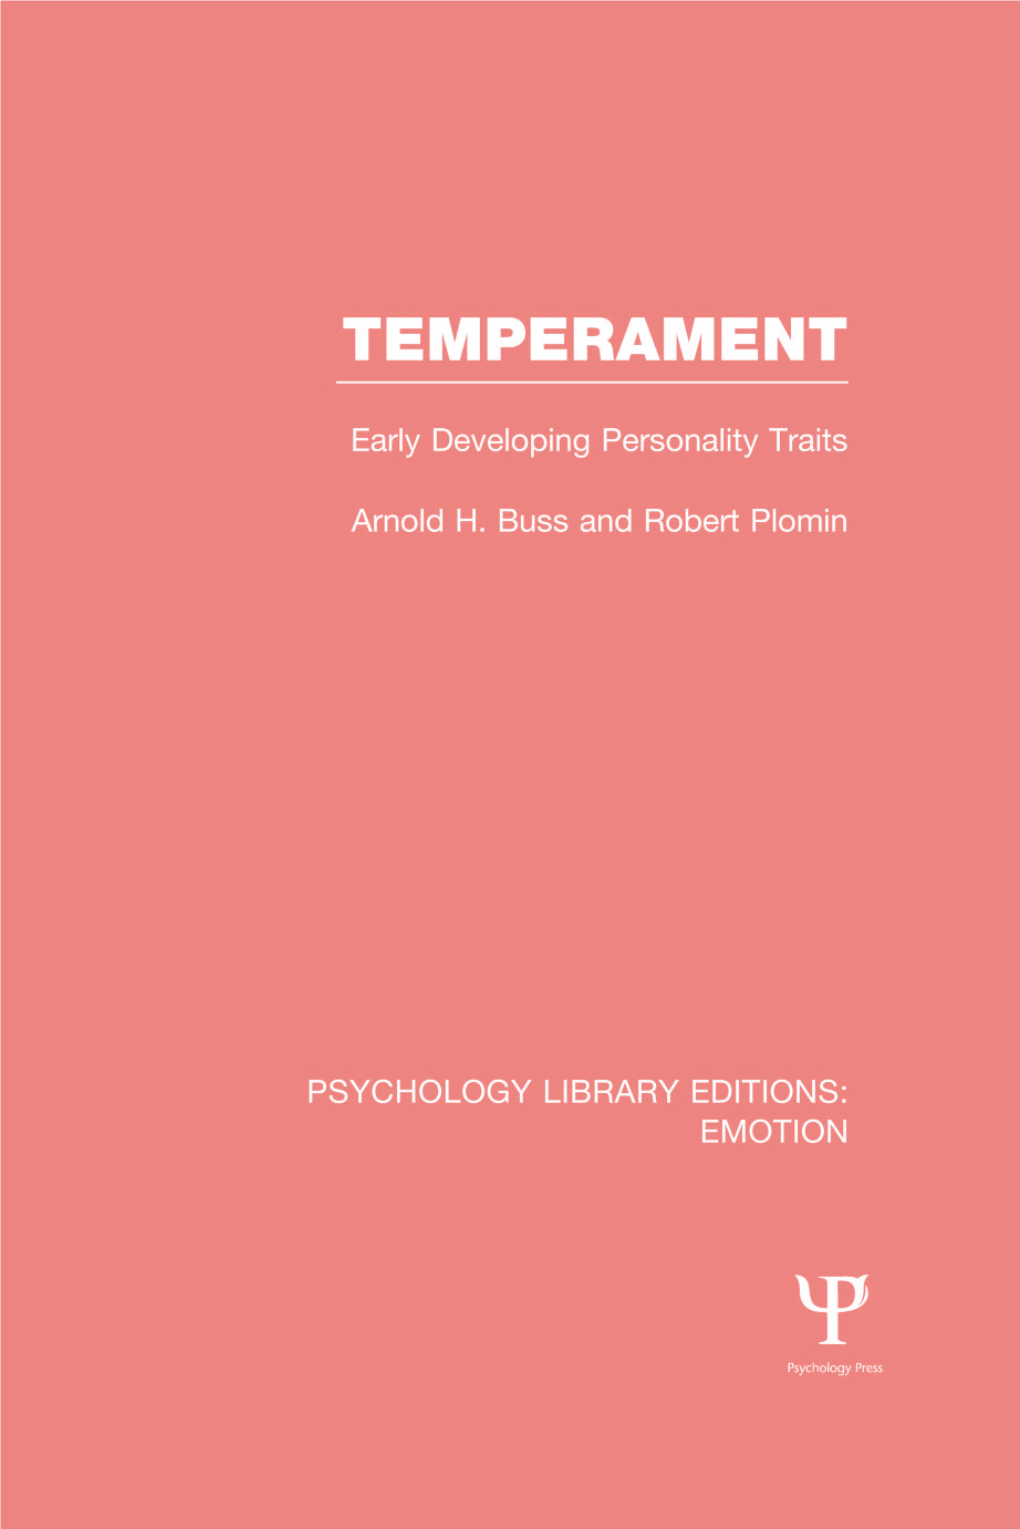 TEMPERAMENT This Page Intentionally Left Blank TEMPERAMENT Early Developing Personality Traits